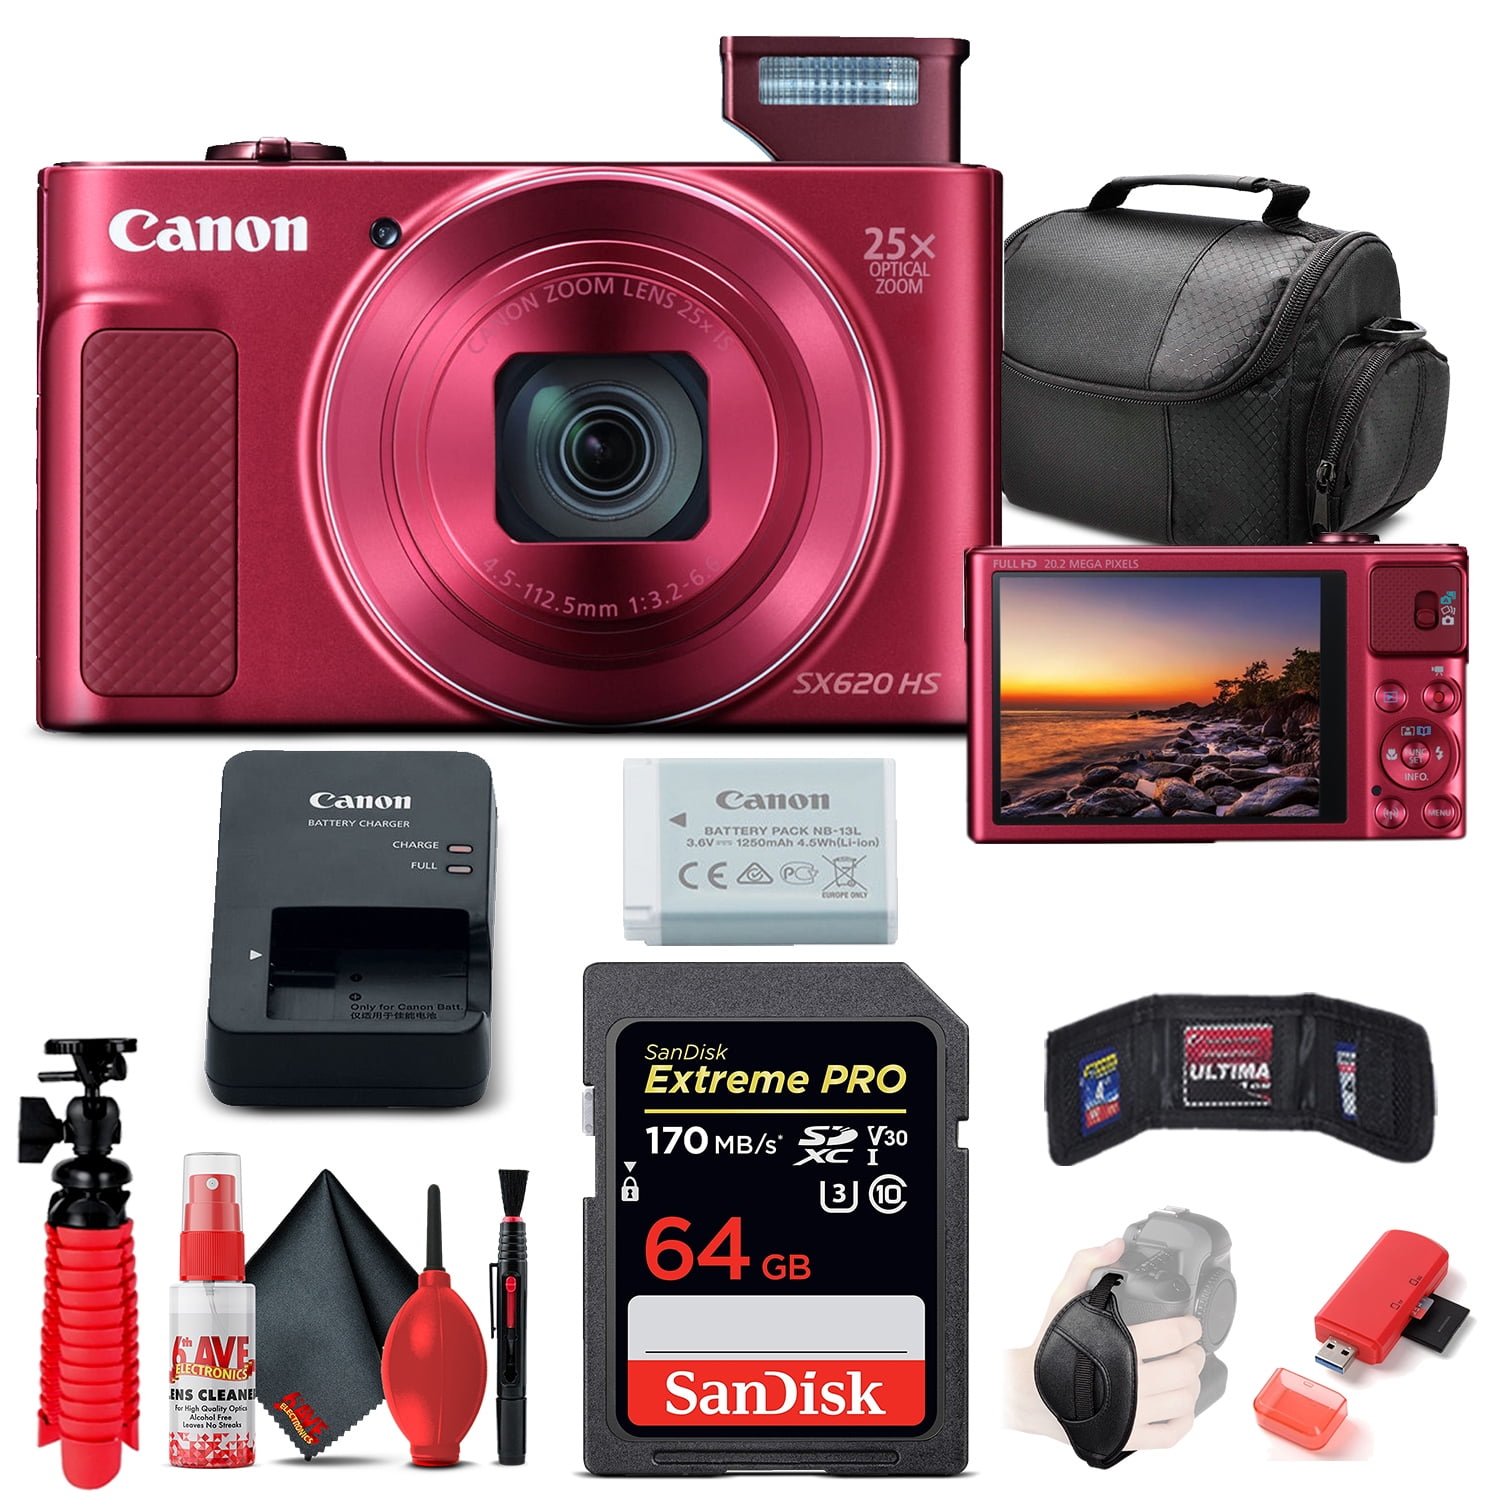 Canon PowerShot SX620 HS Digital Camera (Red) (1073C001) + 64GB Card + More